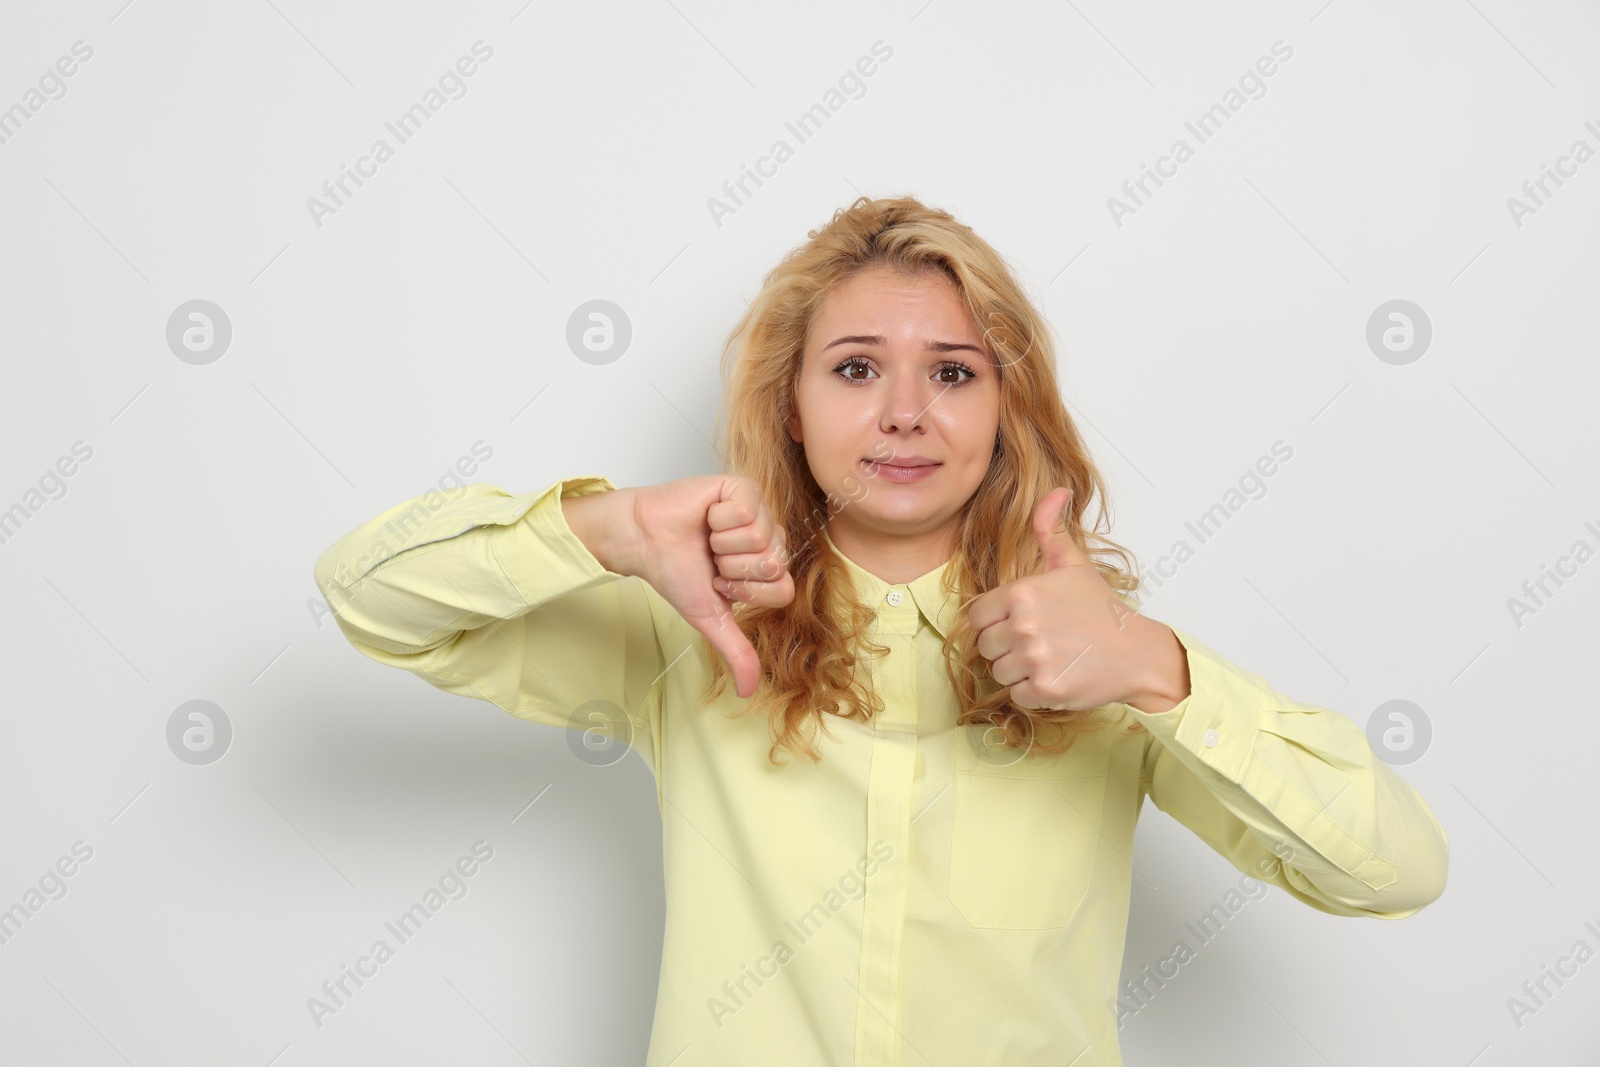 Photo of Conflicted young woman showing thumbs up and down gestures on white background